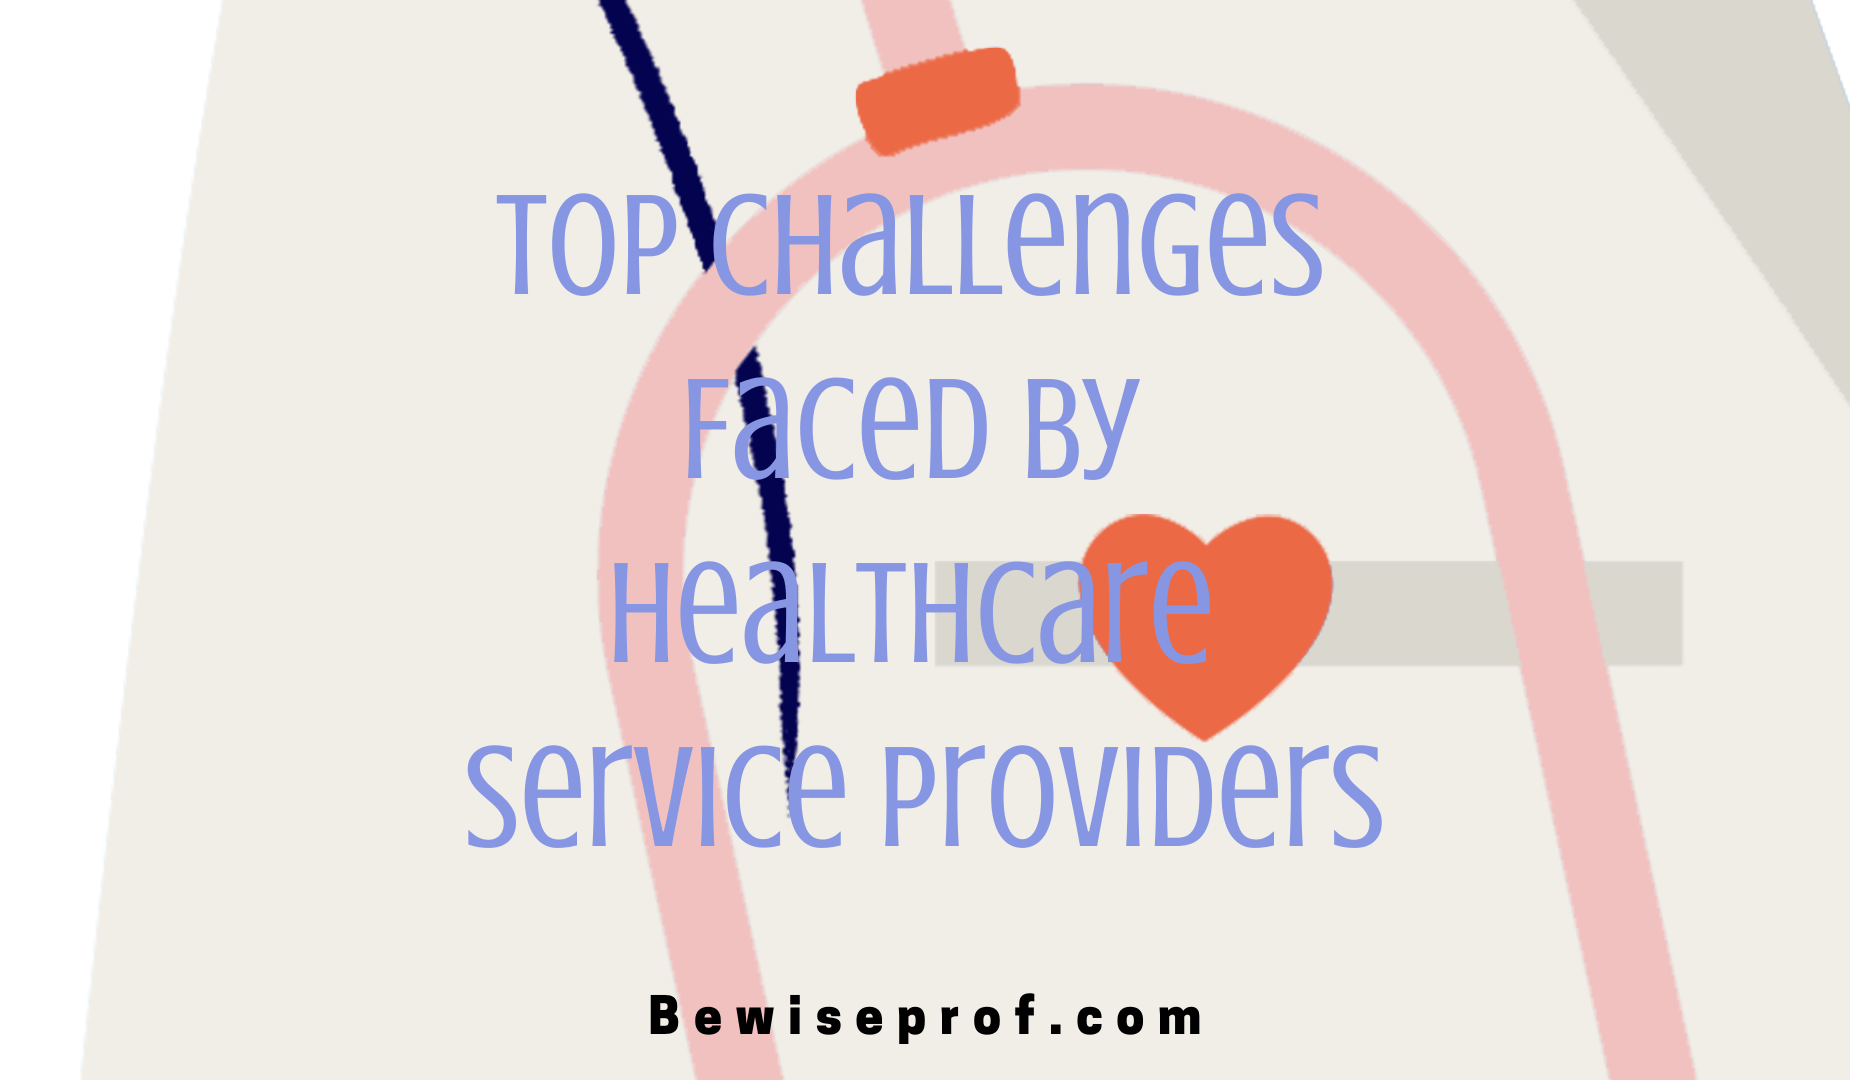 Top Challenges Faced By Healthcare Service Providers